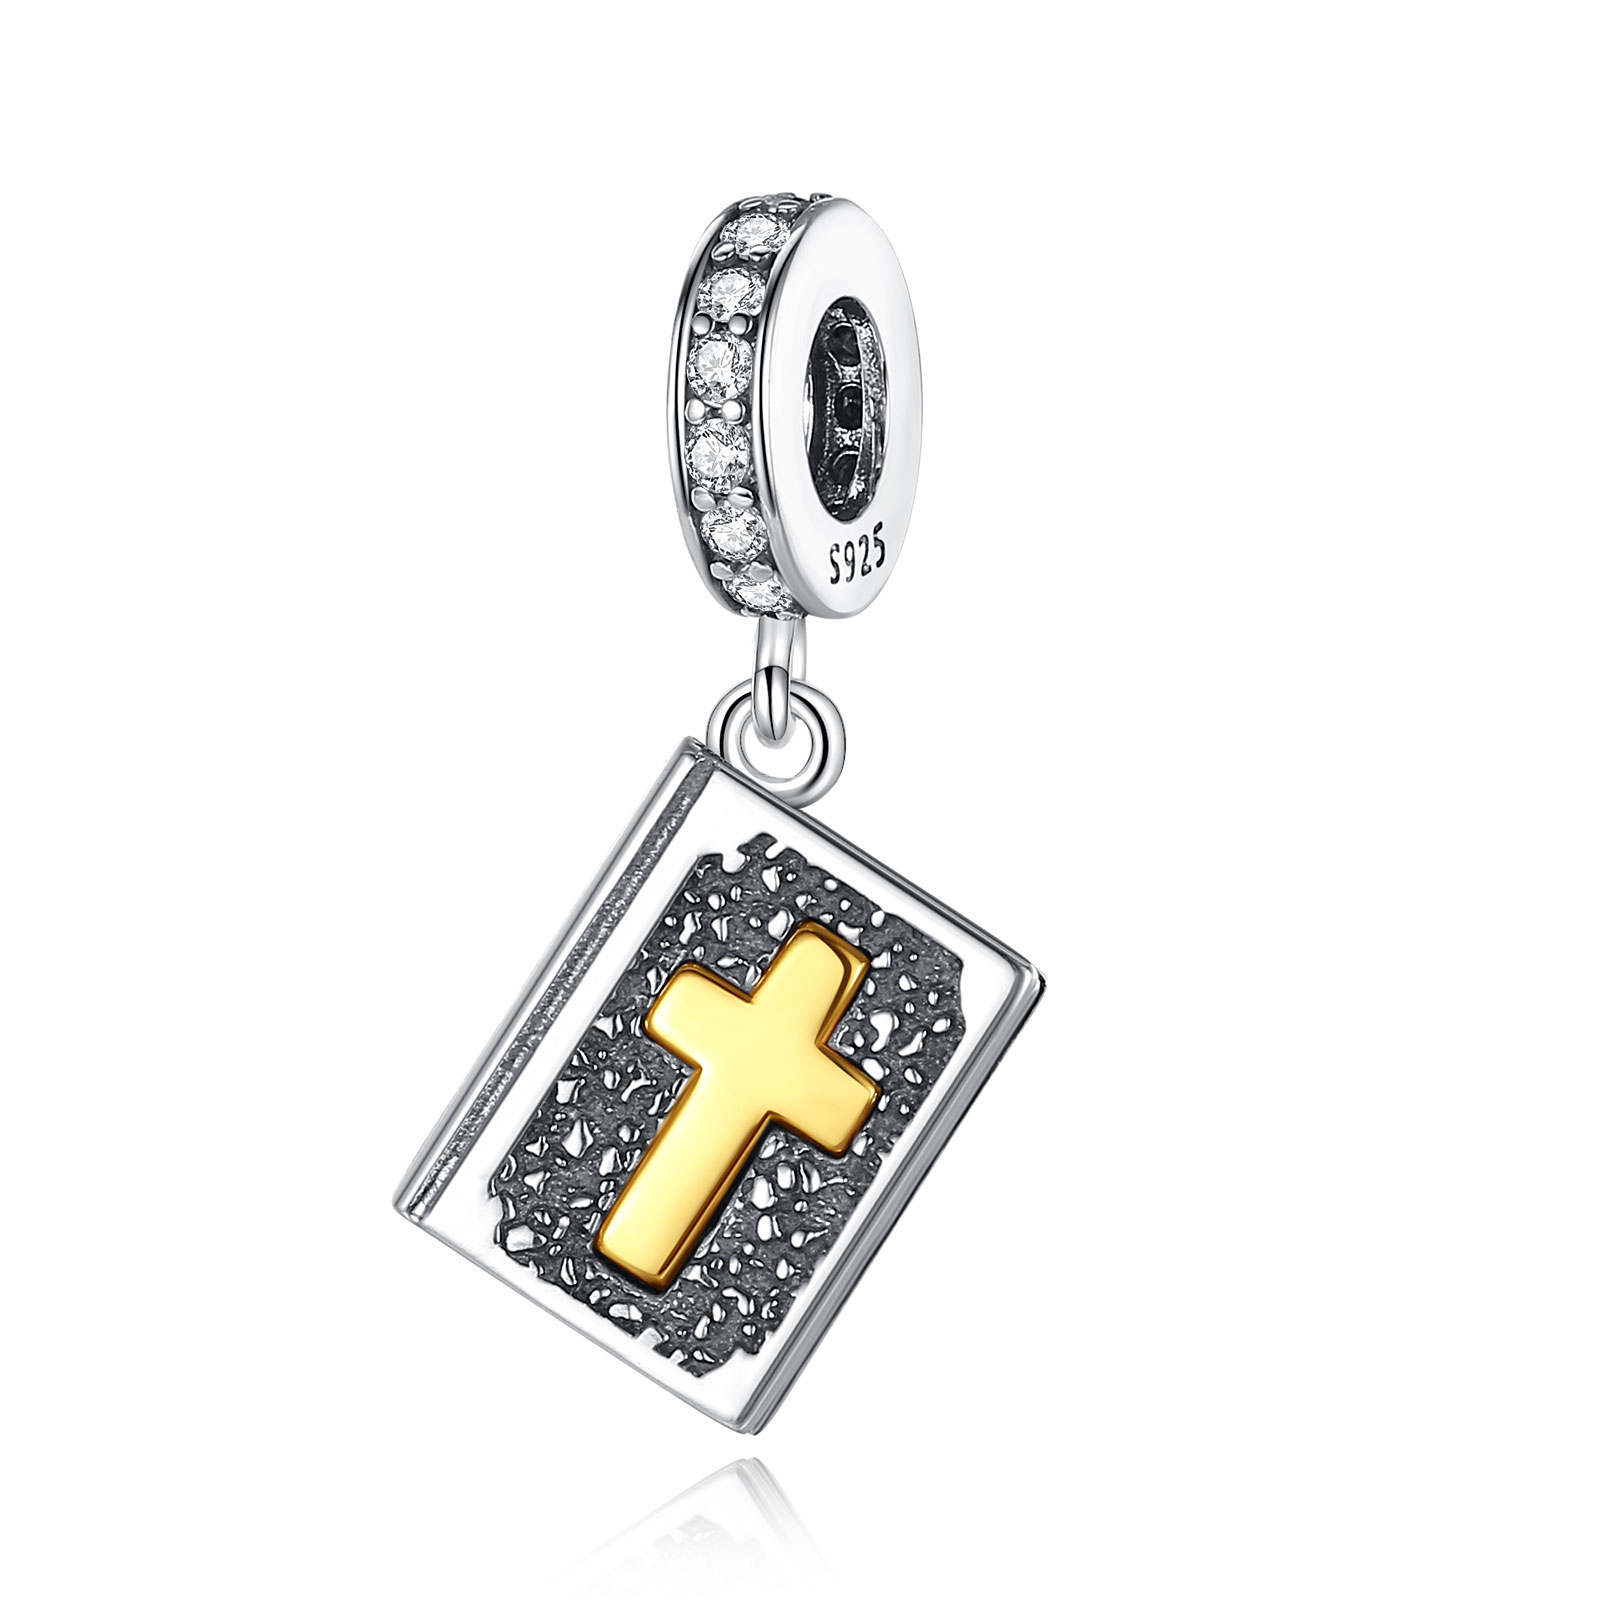 Merryshine Jewelry Wholesale Factory Price 925 Sterling Silver Bible Book Shaped Charm for Bracelets